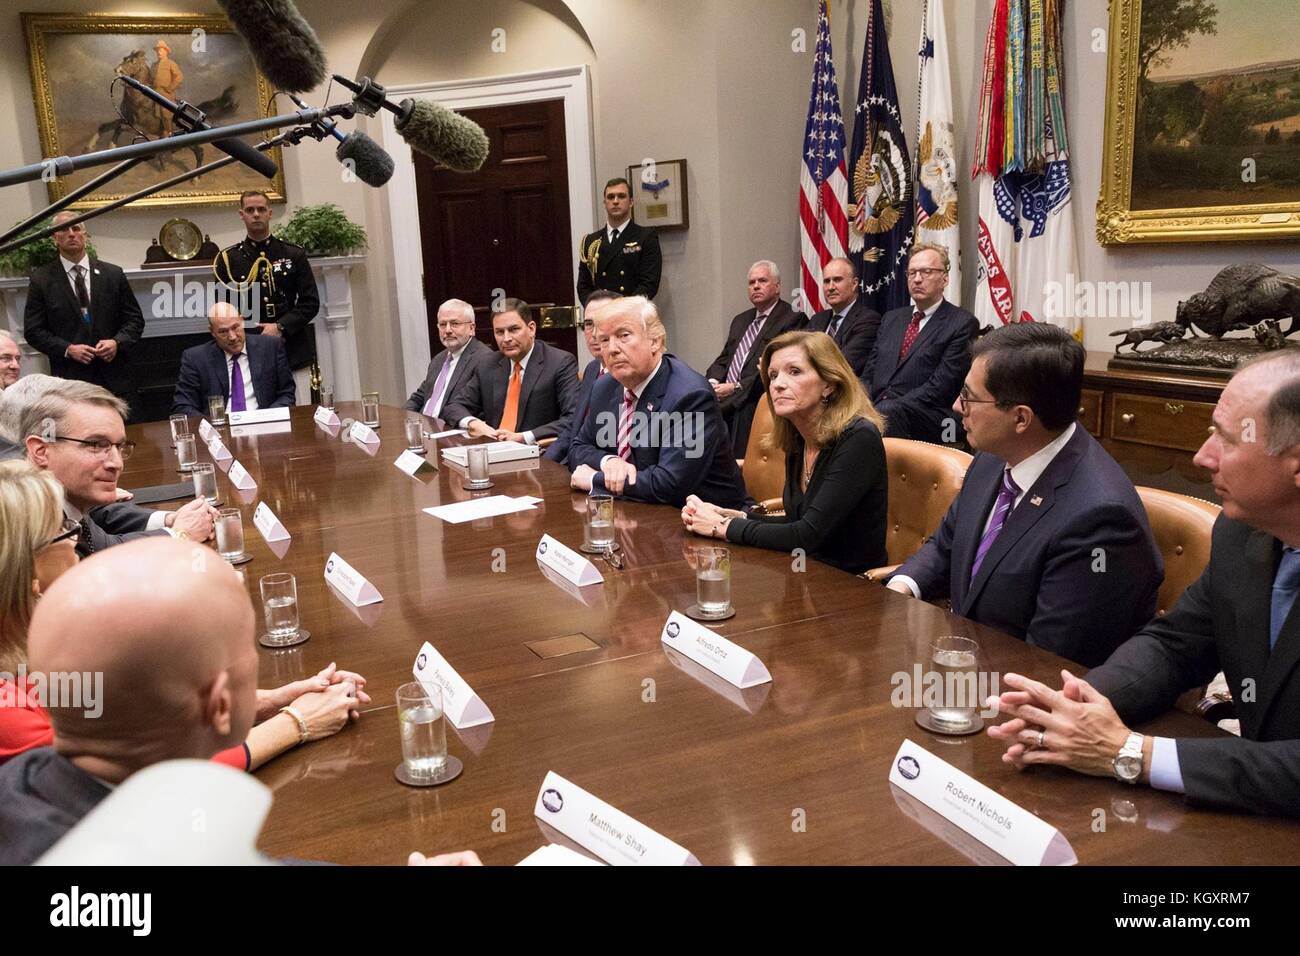 U.S. President Donald Trump hosts a tax reform meeting at the White House October 31, 2017 in Washington, DC.  (photo by Shealah Craighead via Planetpix) Stock Photo